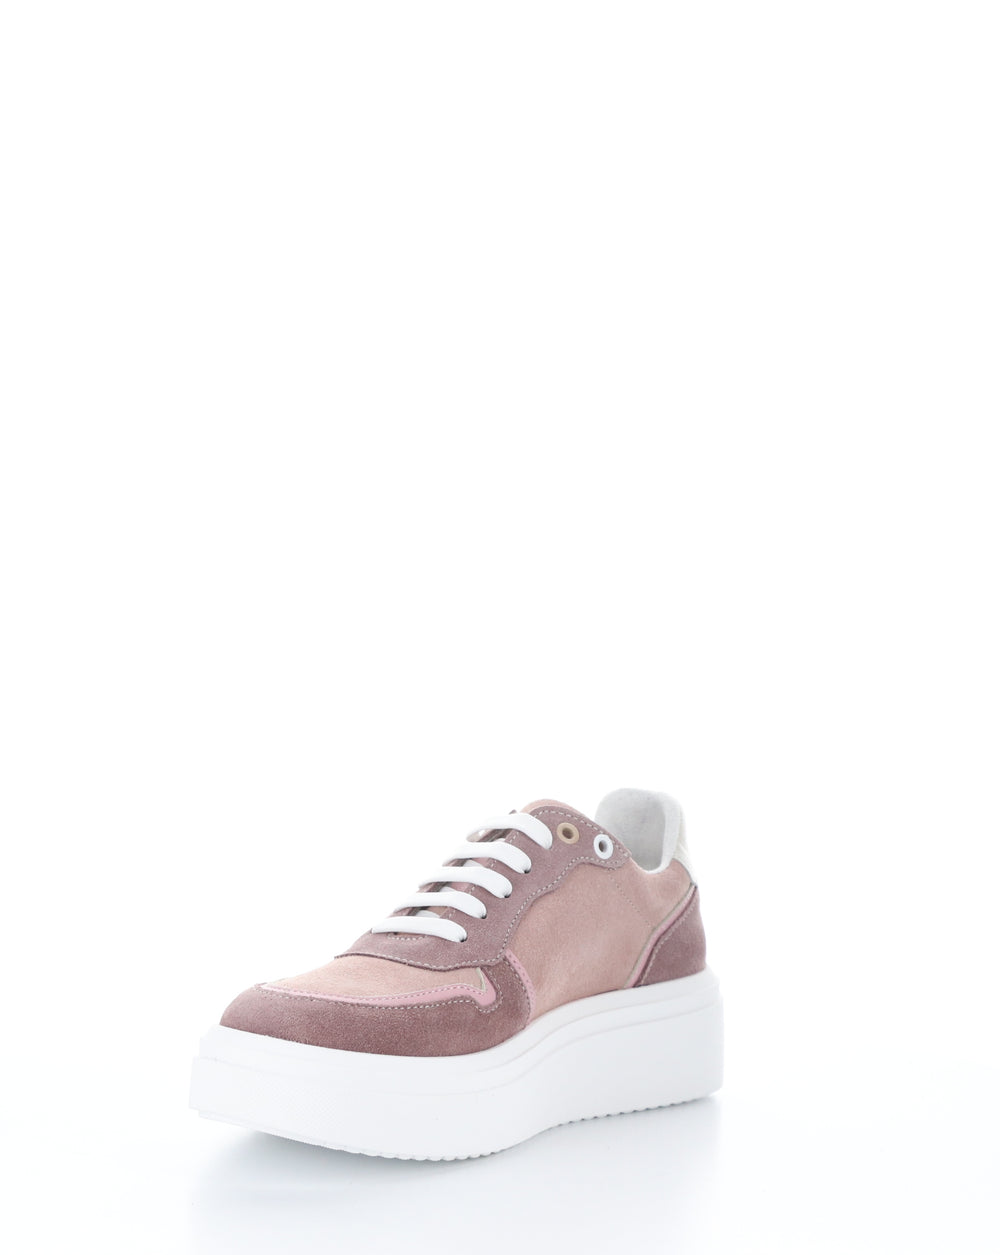 FULTON OLD ROSE Lace-up Shoes